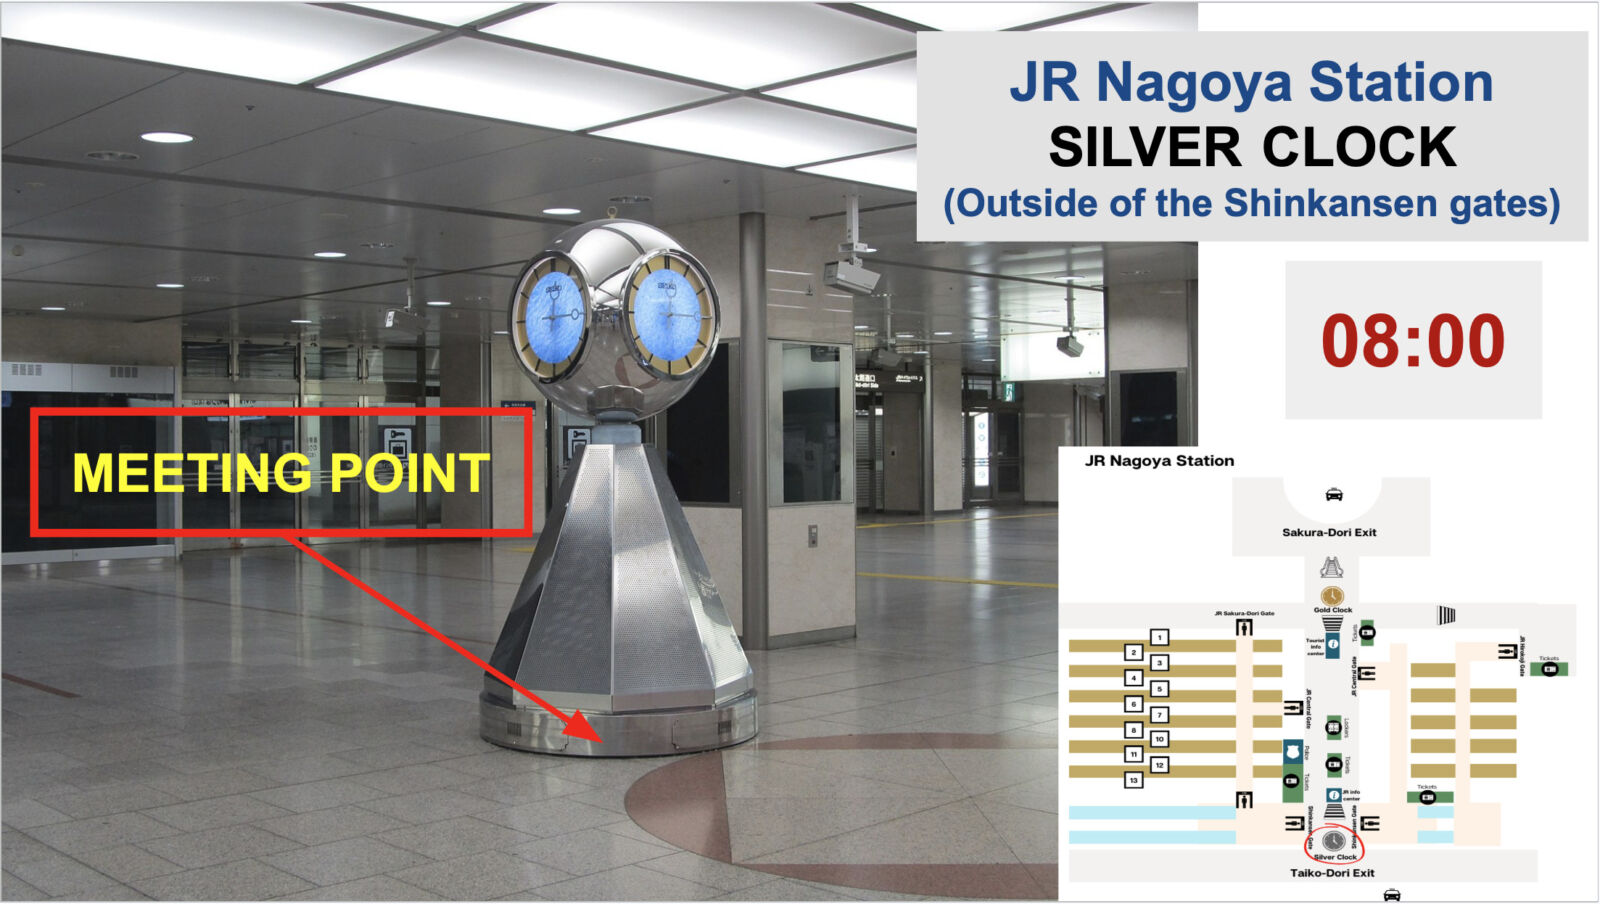 8:00 meeting spot is the Silver Clock towner in JR Nagoya Station